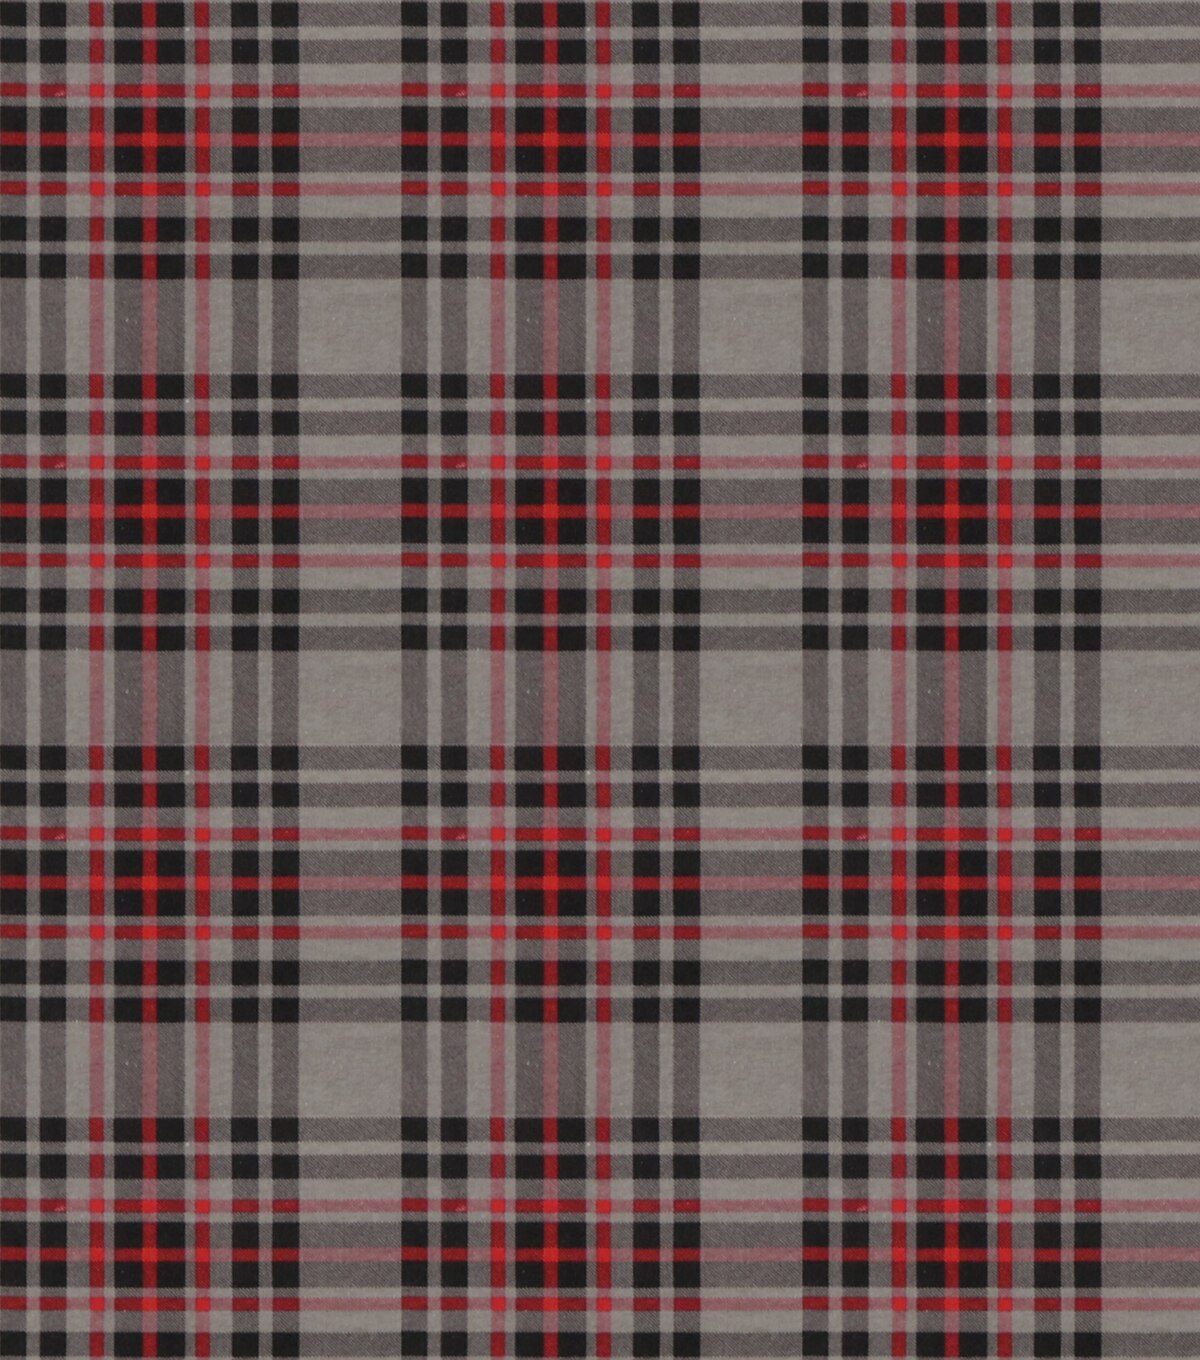 Super Snuggle Flannel  Fabric  Large Gray Red  Black  Plaid 